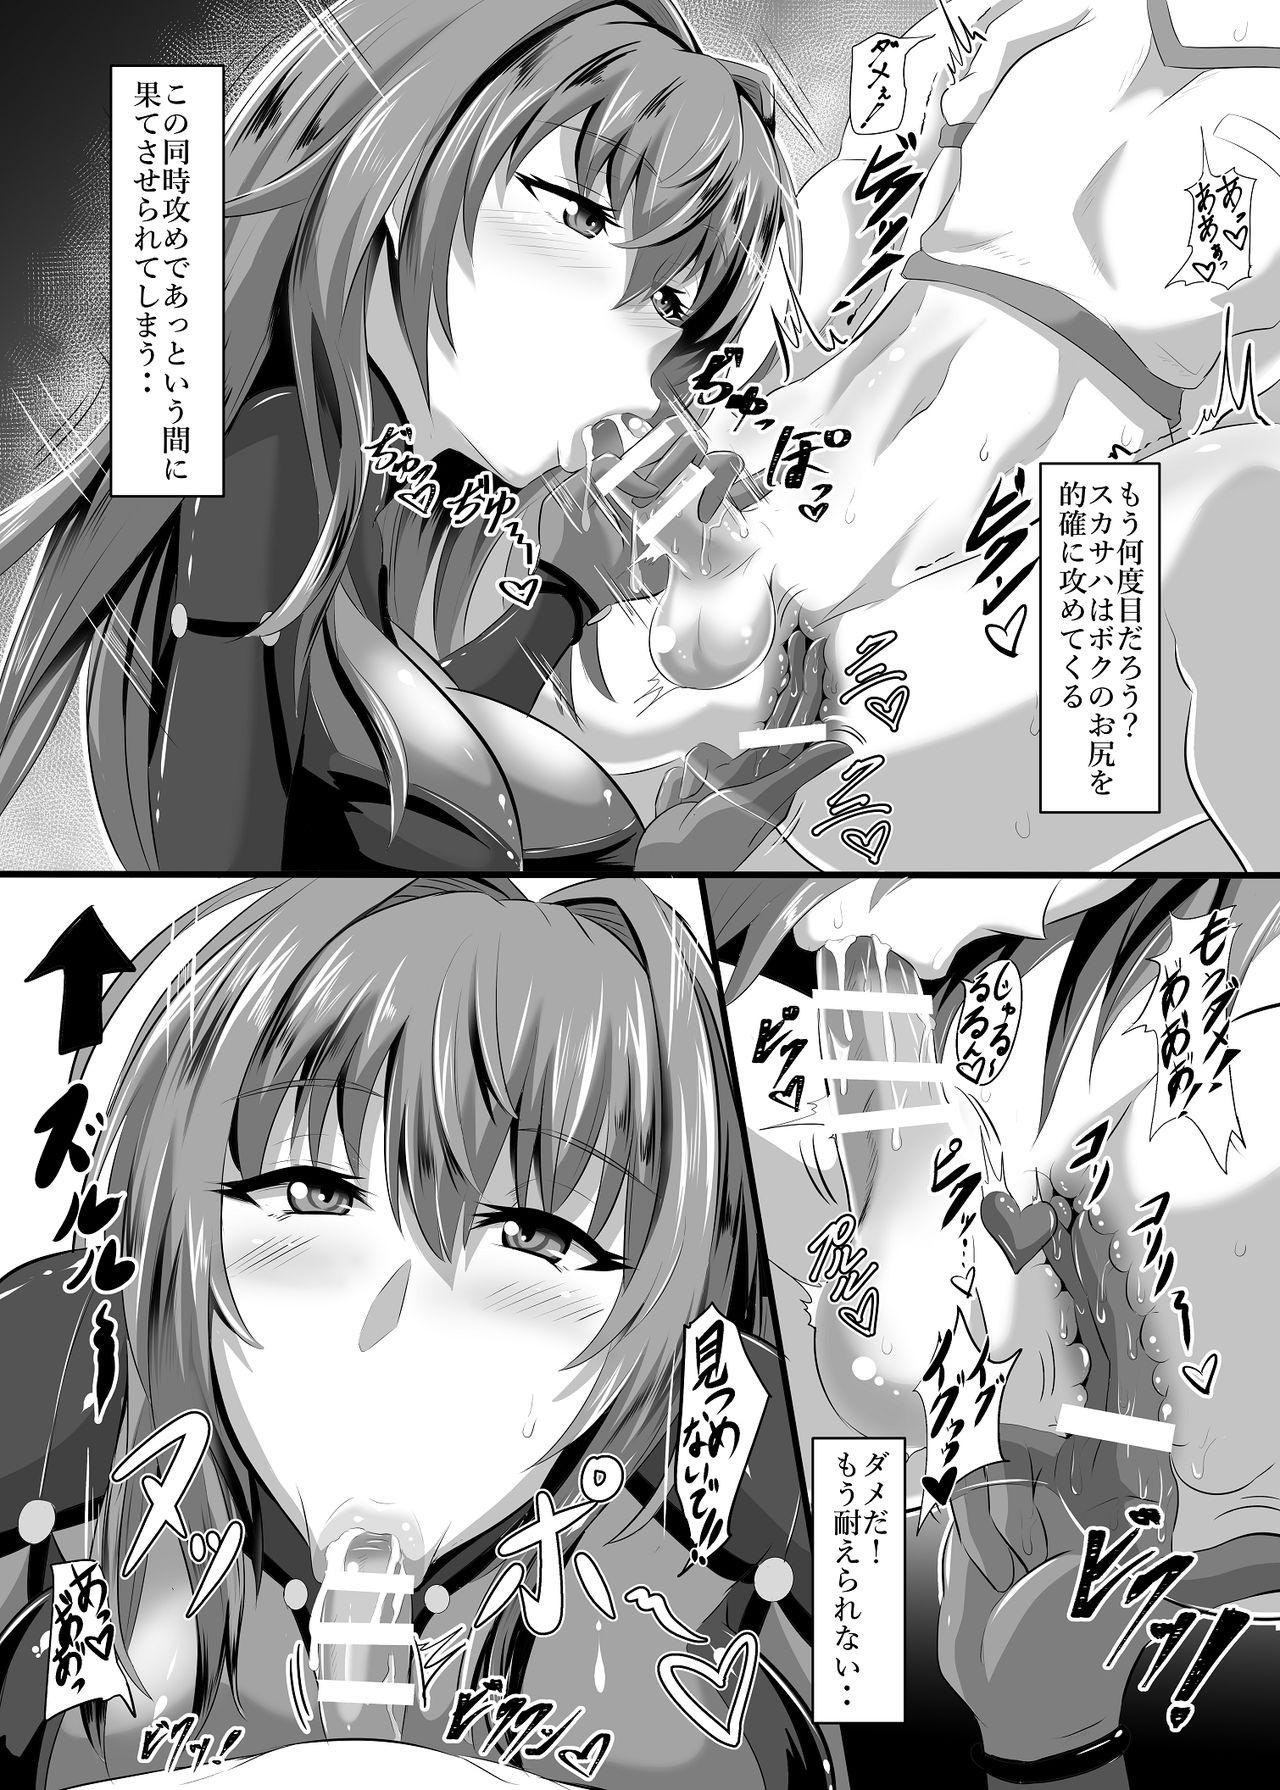 Ass Lick Gehenna 5 - Fate grand order Crazy - Page 6